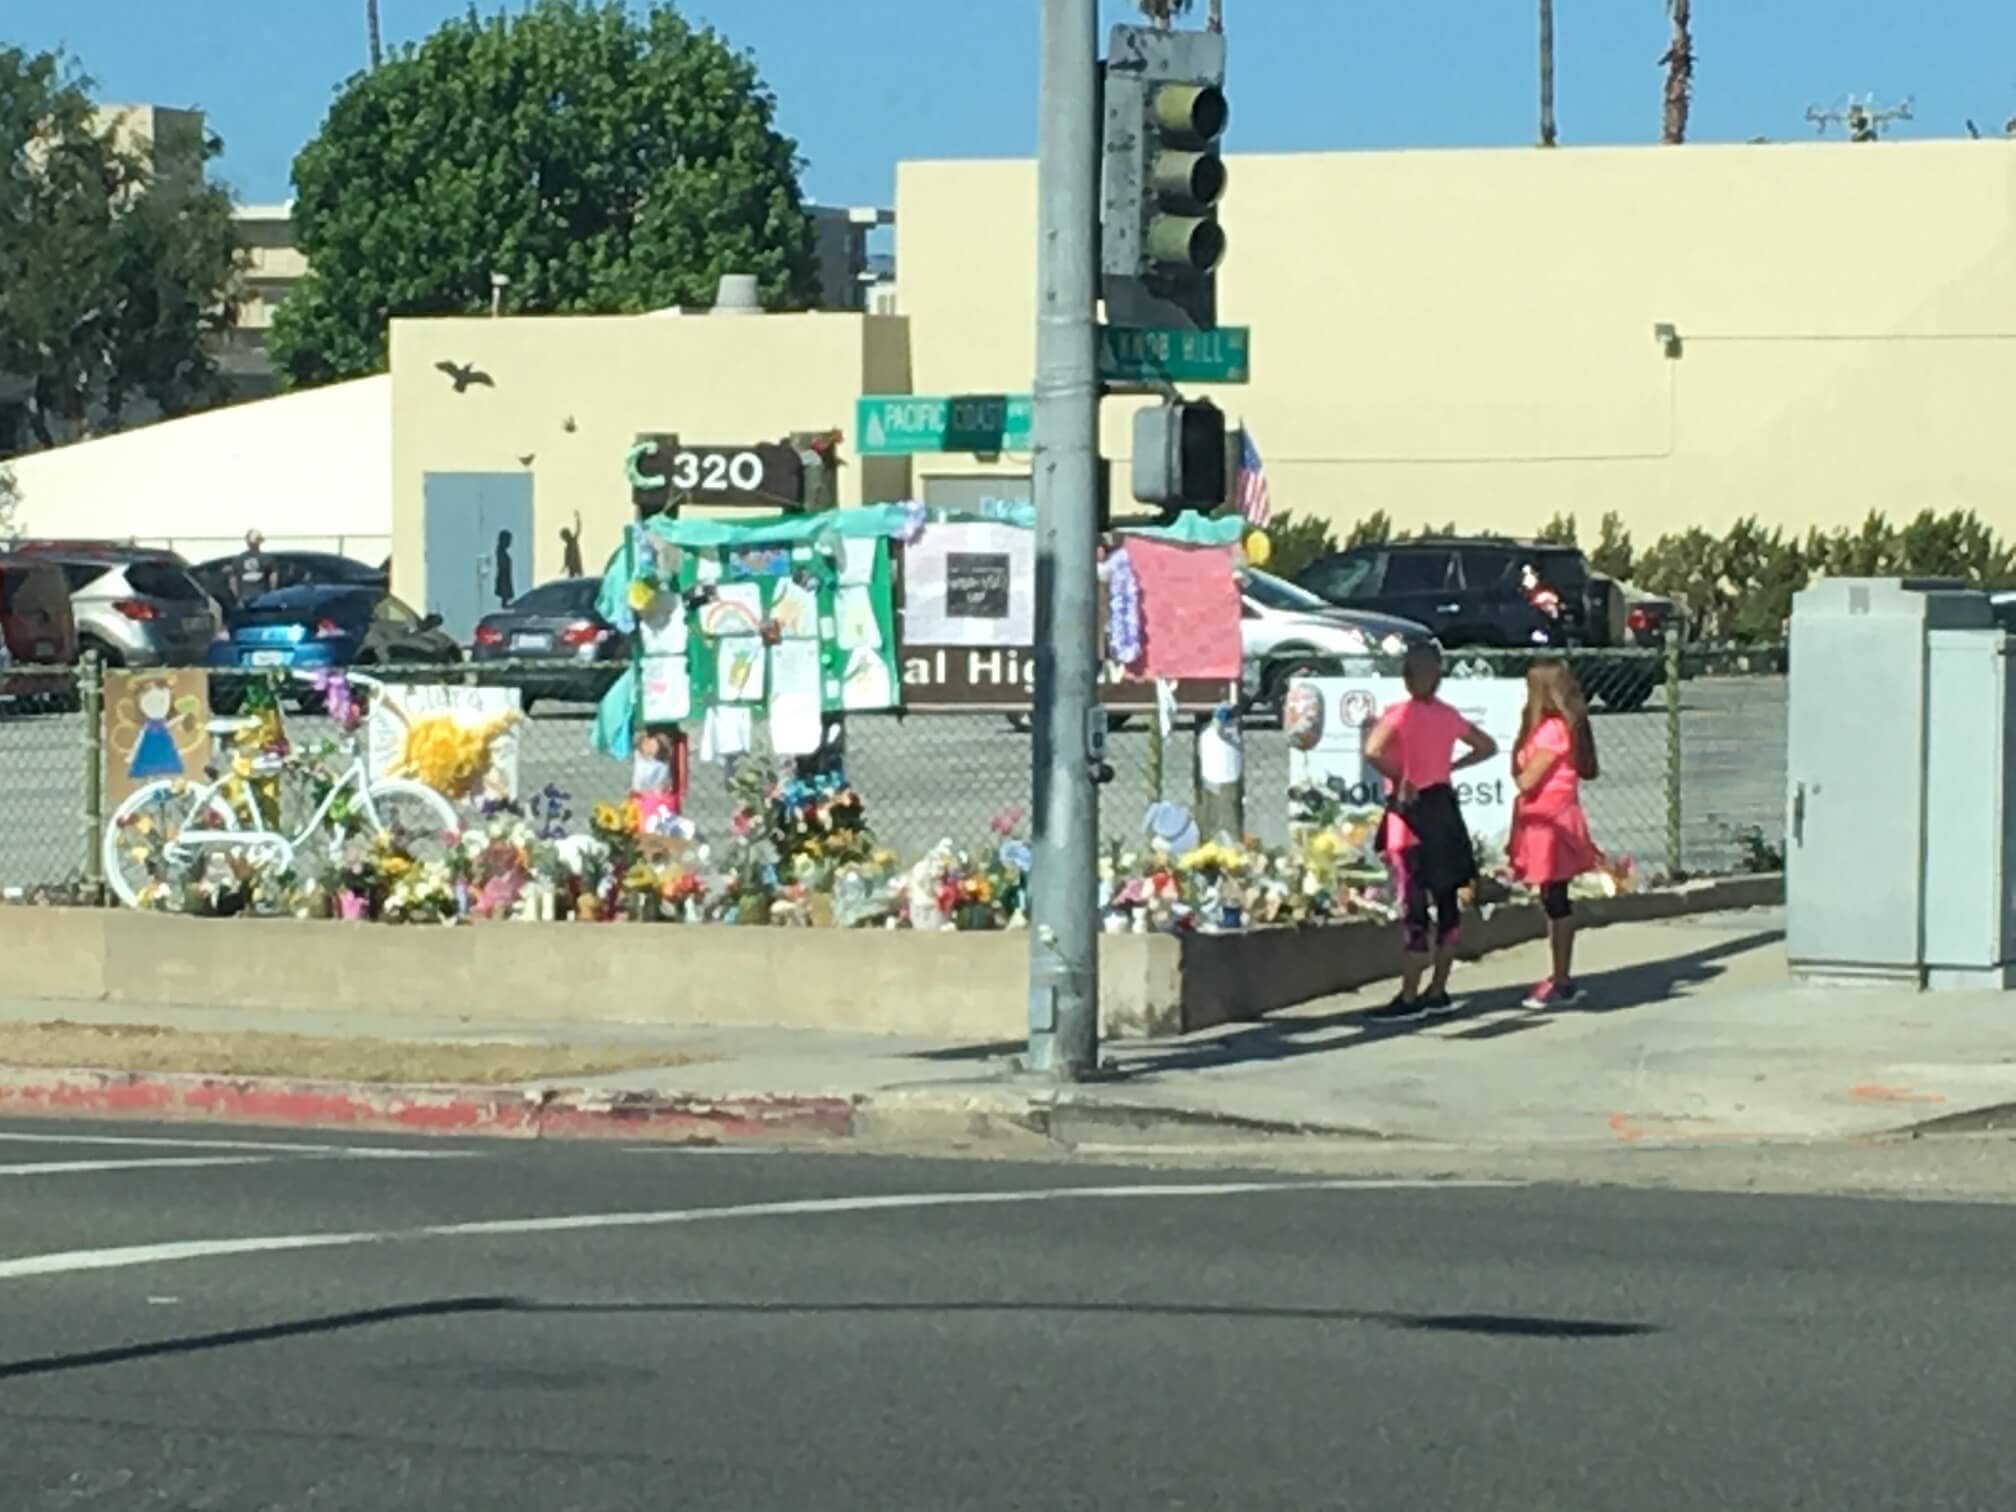 Memorial for two children kiled in bicycle accident in Redondo Beach, CA.